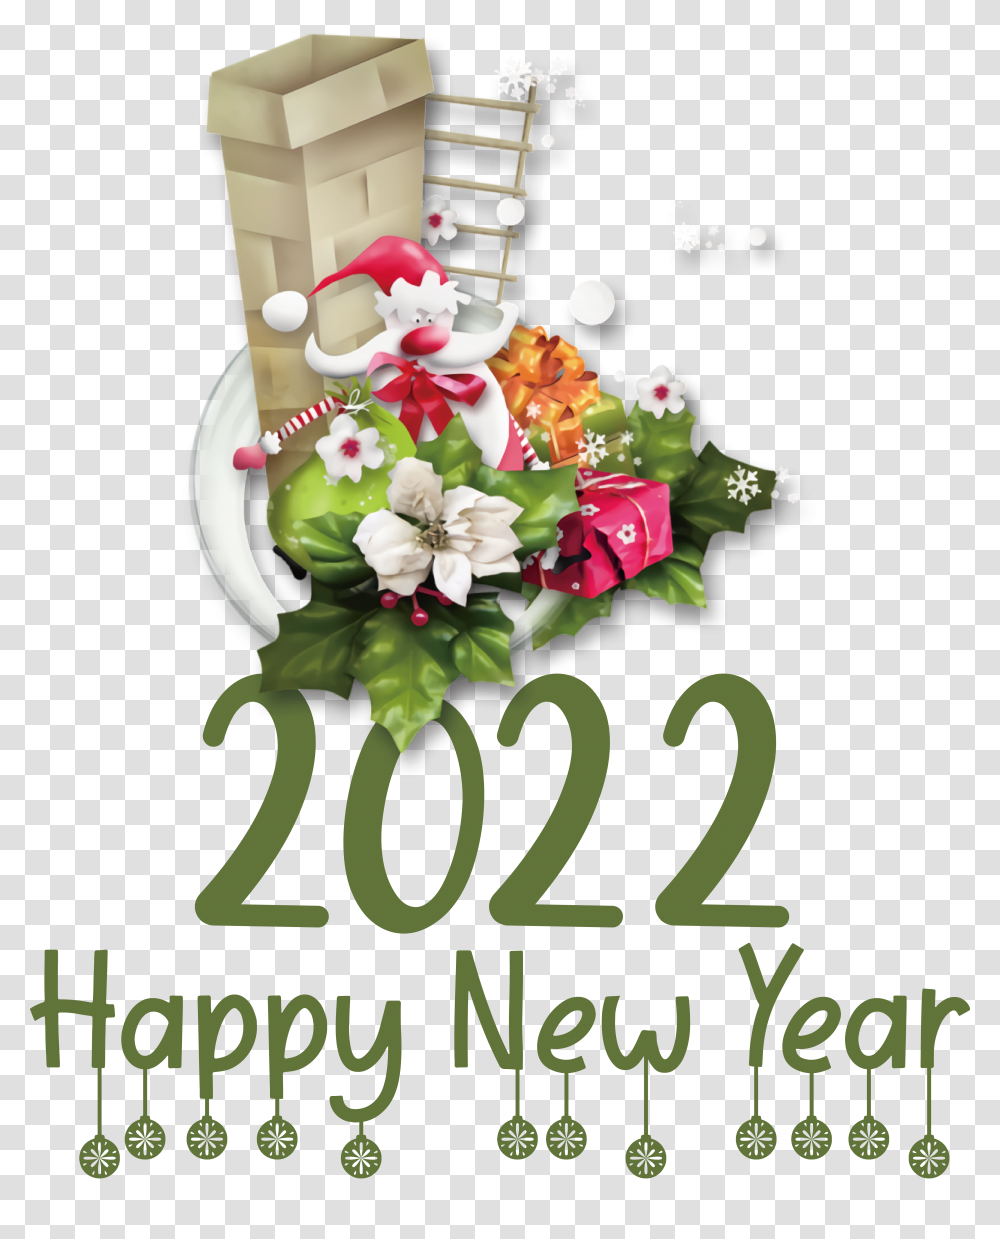 Mrs Claus New Year Merry Christmas And Happy New Year 2022 For New Year, Plant, Graphics, Art, Text Transparent Png